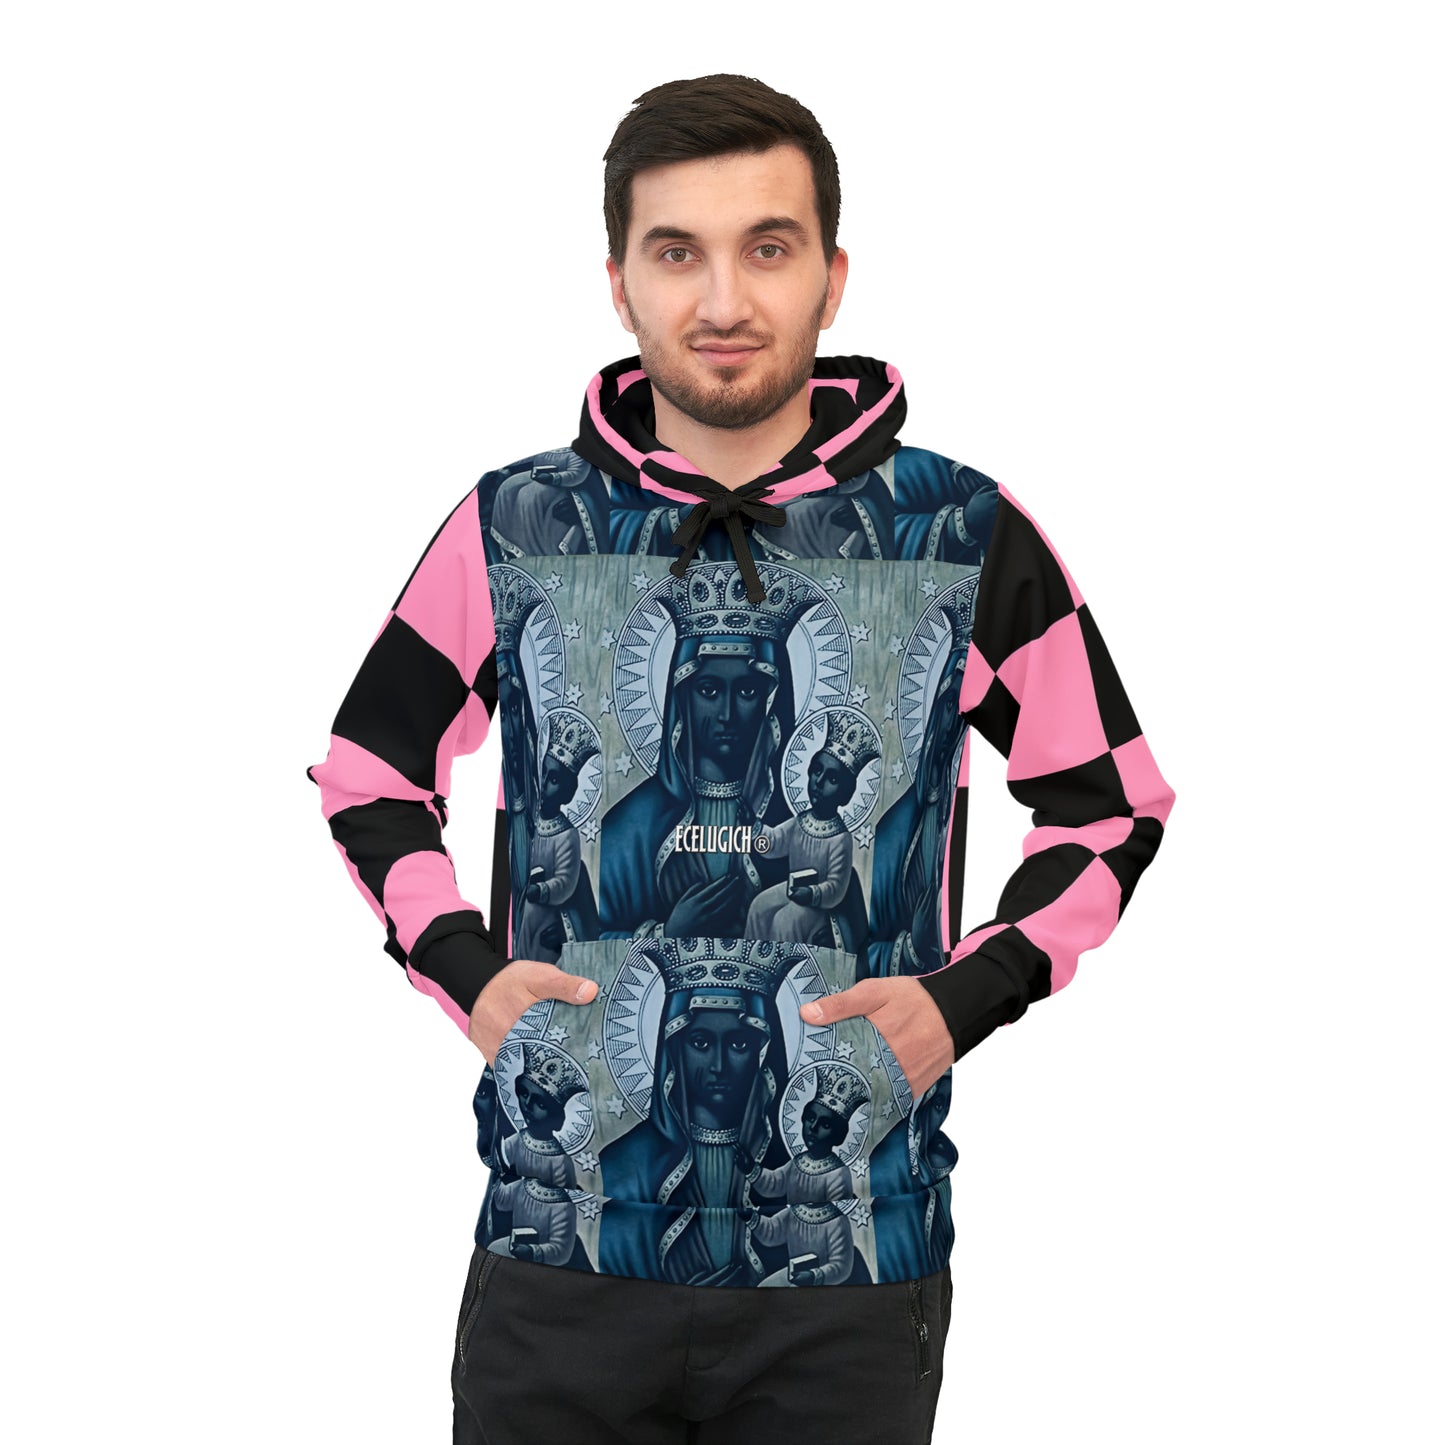 ECELUGICH Athletic Hoodie Mary print pink